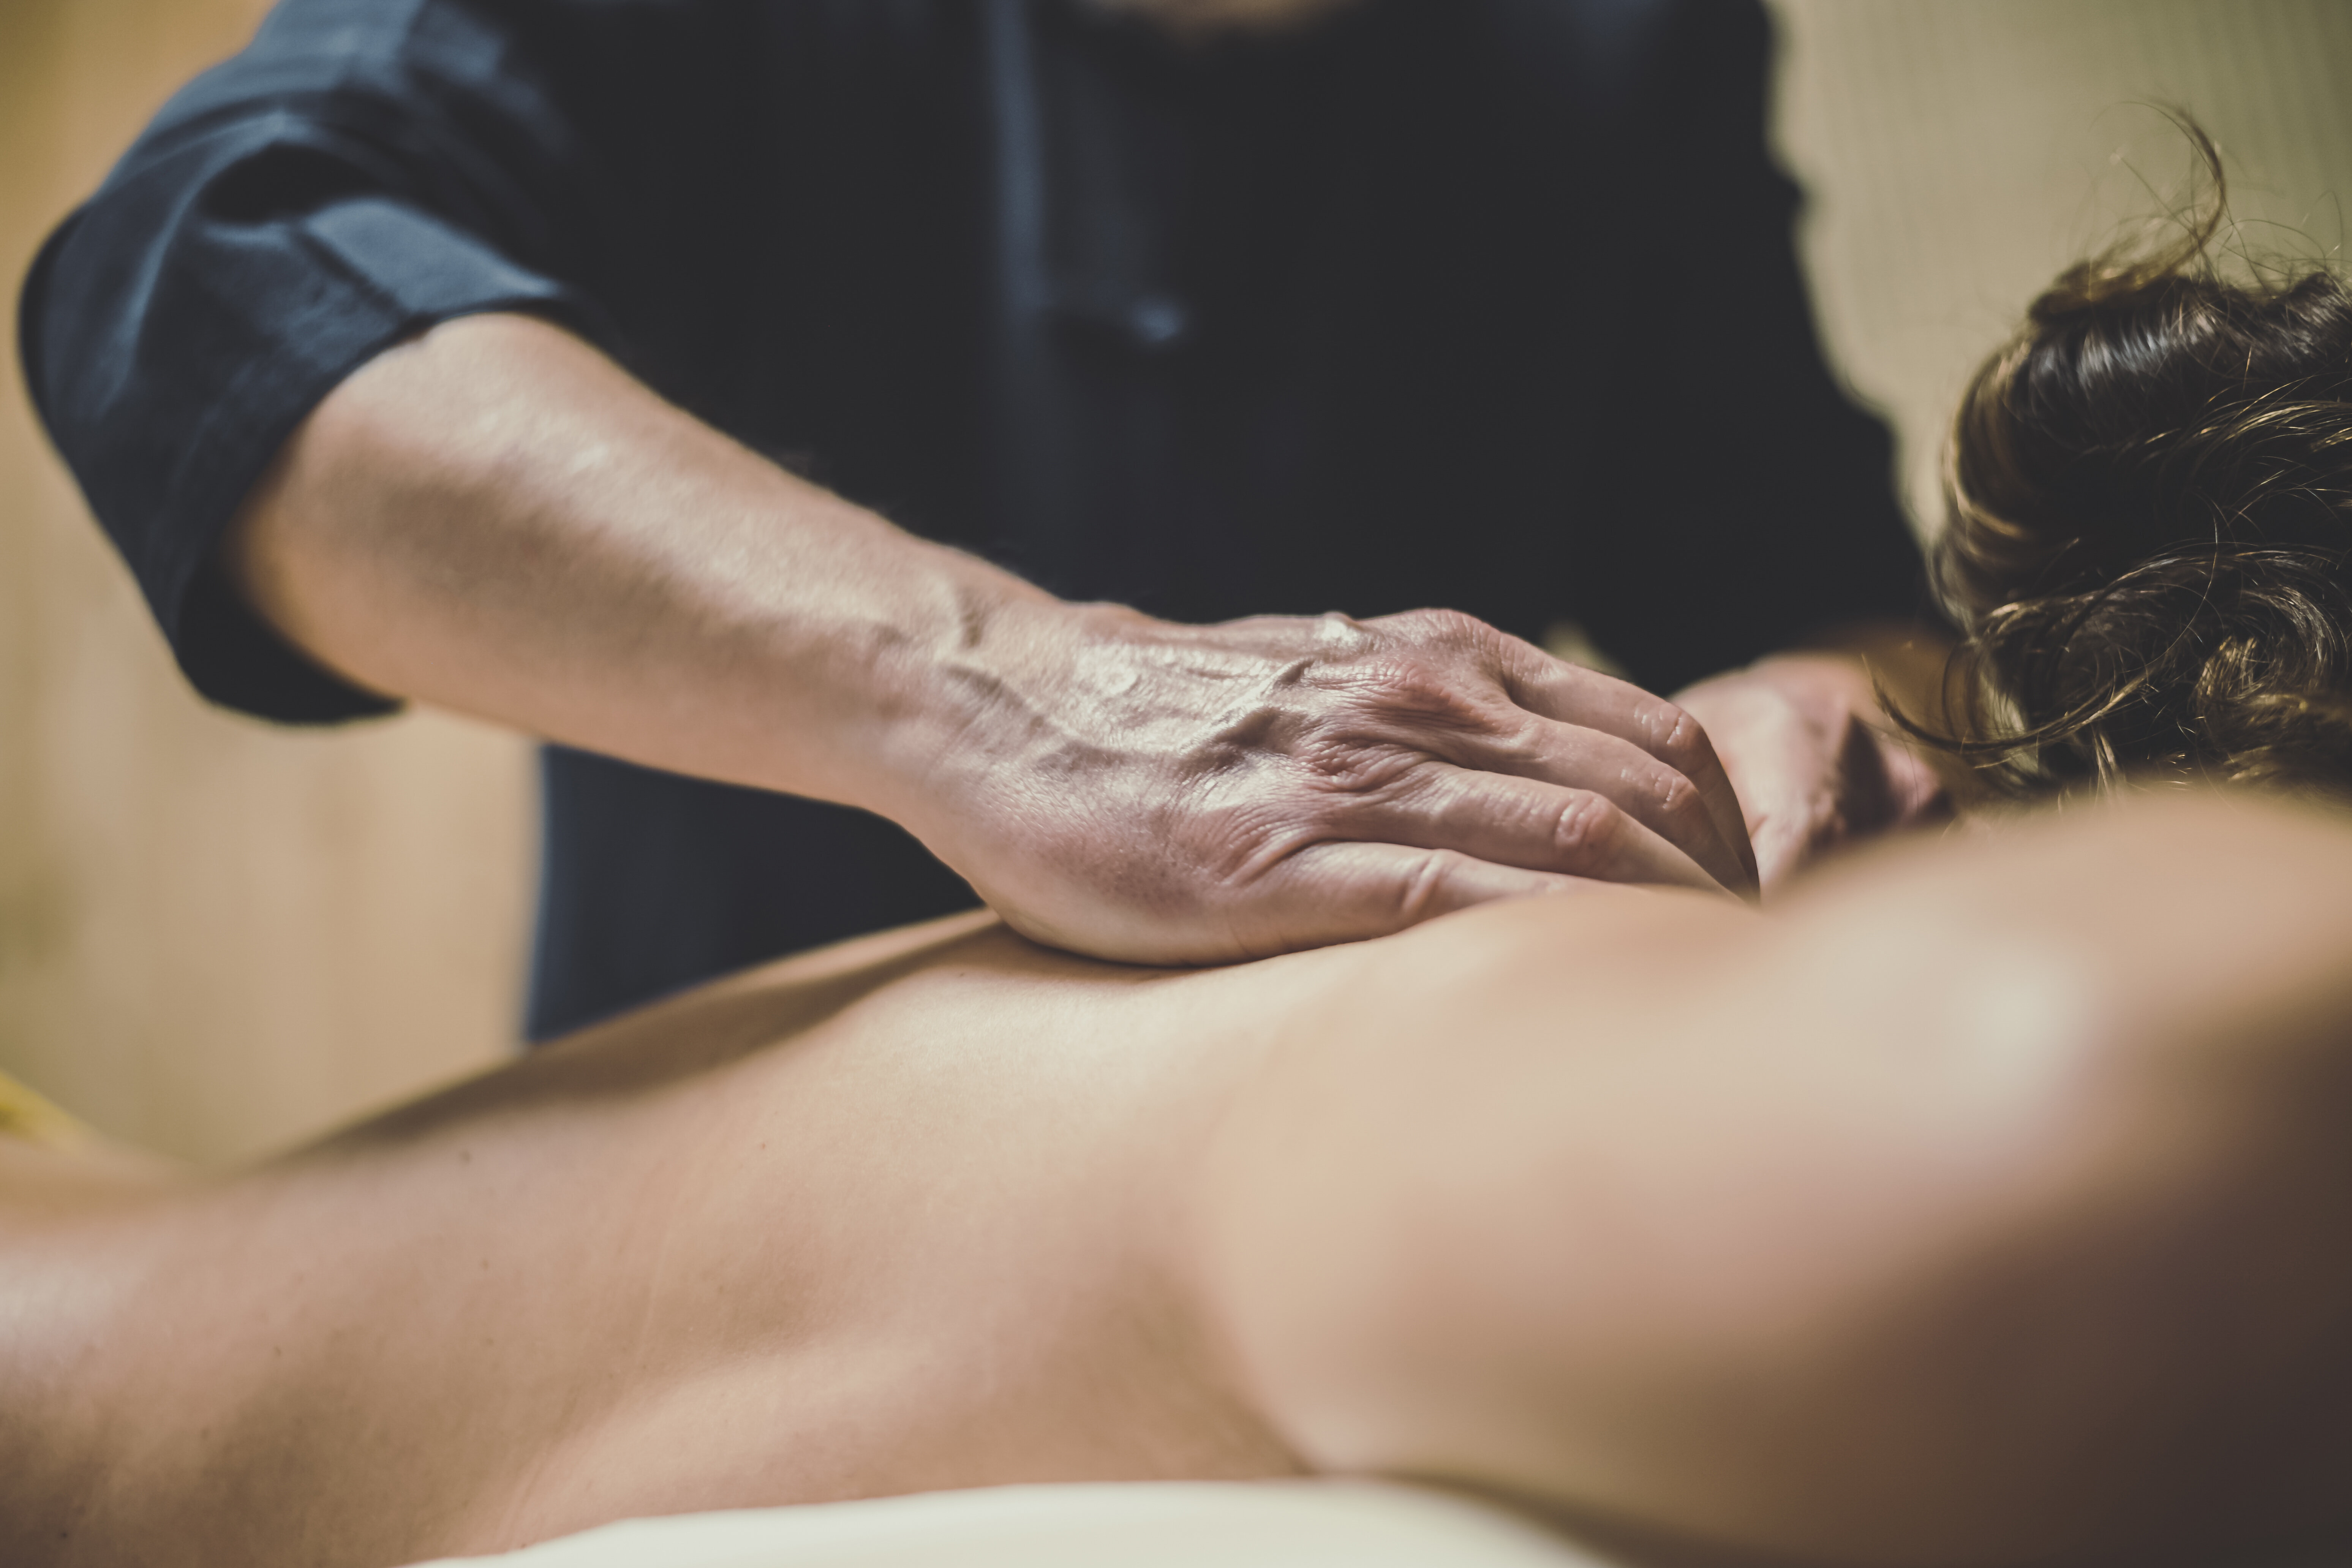 Happy Ending Massage My Experience As A Middle-Aged Woman HuffPost HuffPost Personal pic